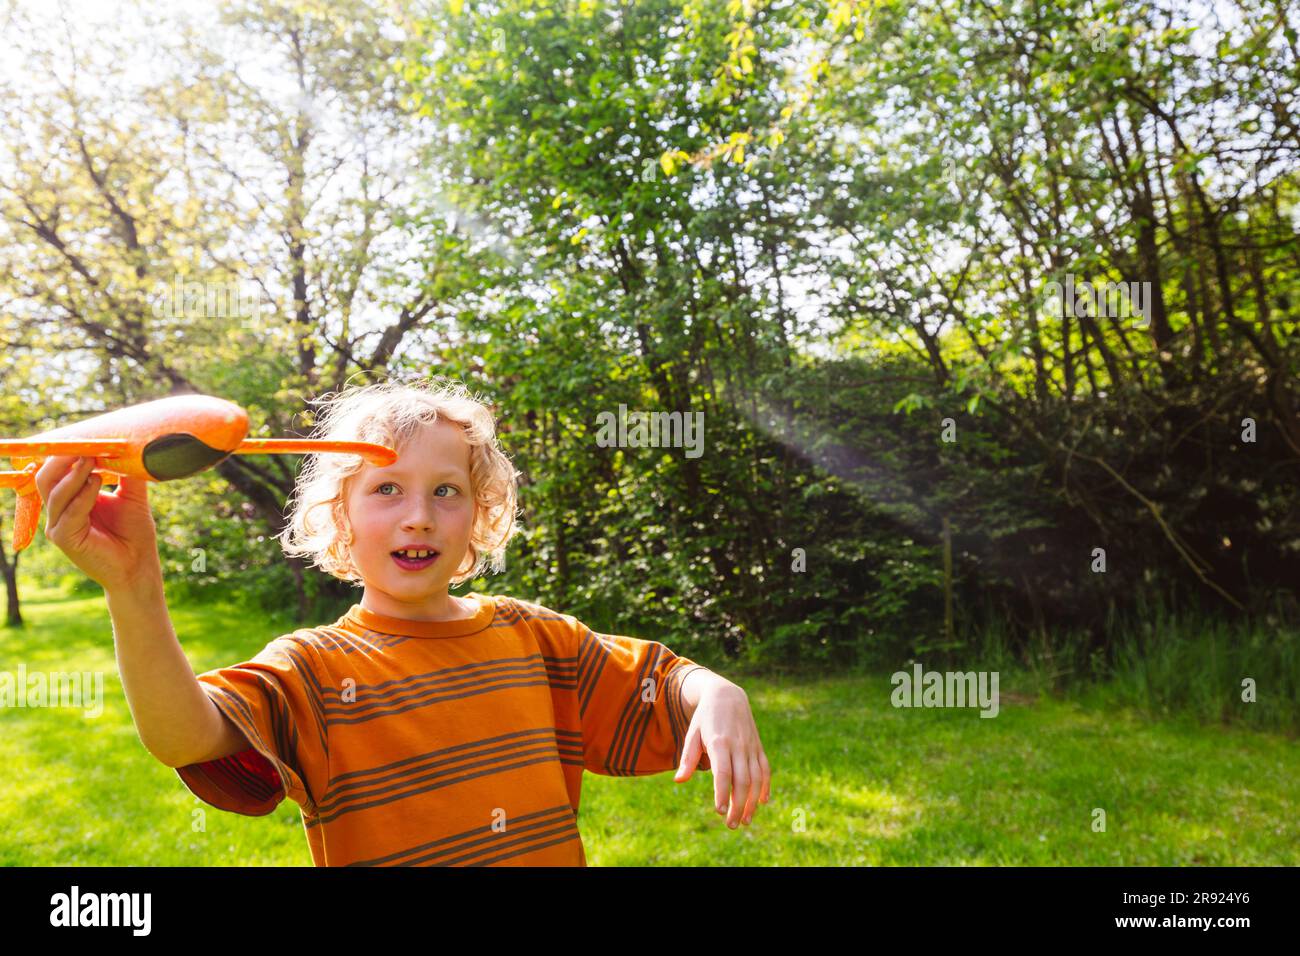 Happy blond boy playing with airplane toy Stock Photo